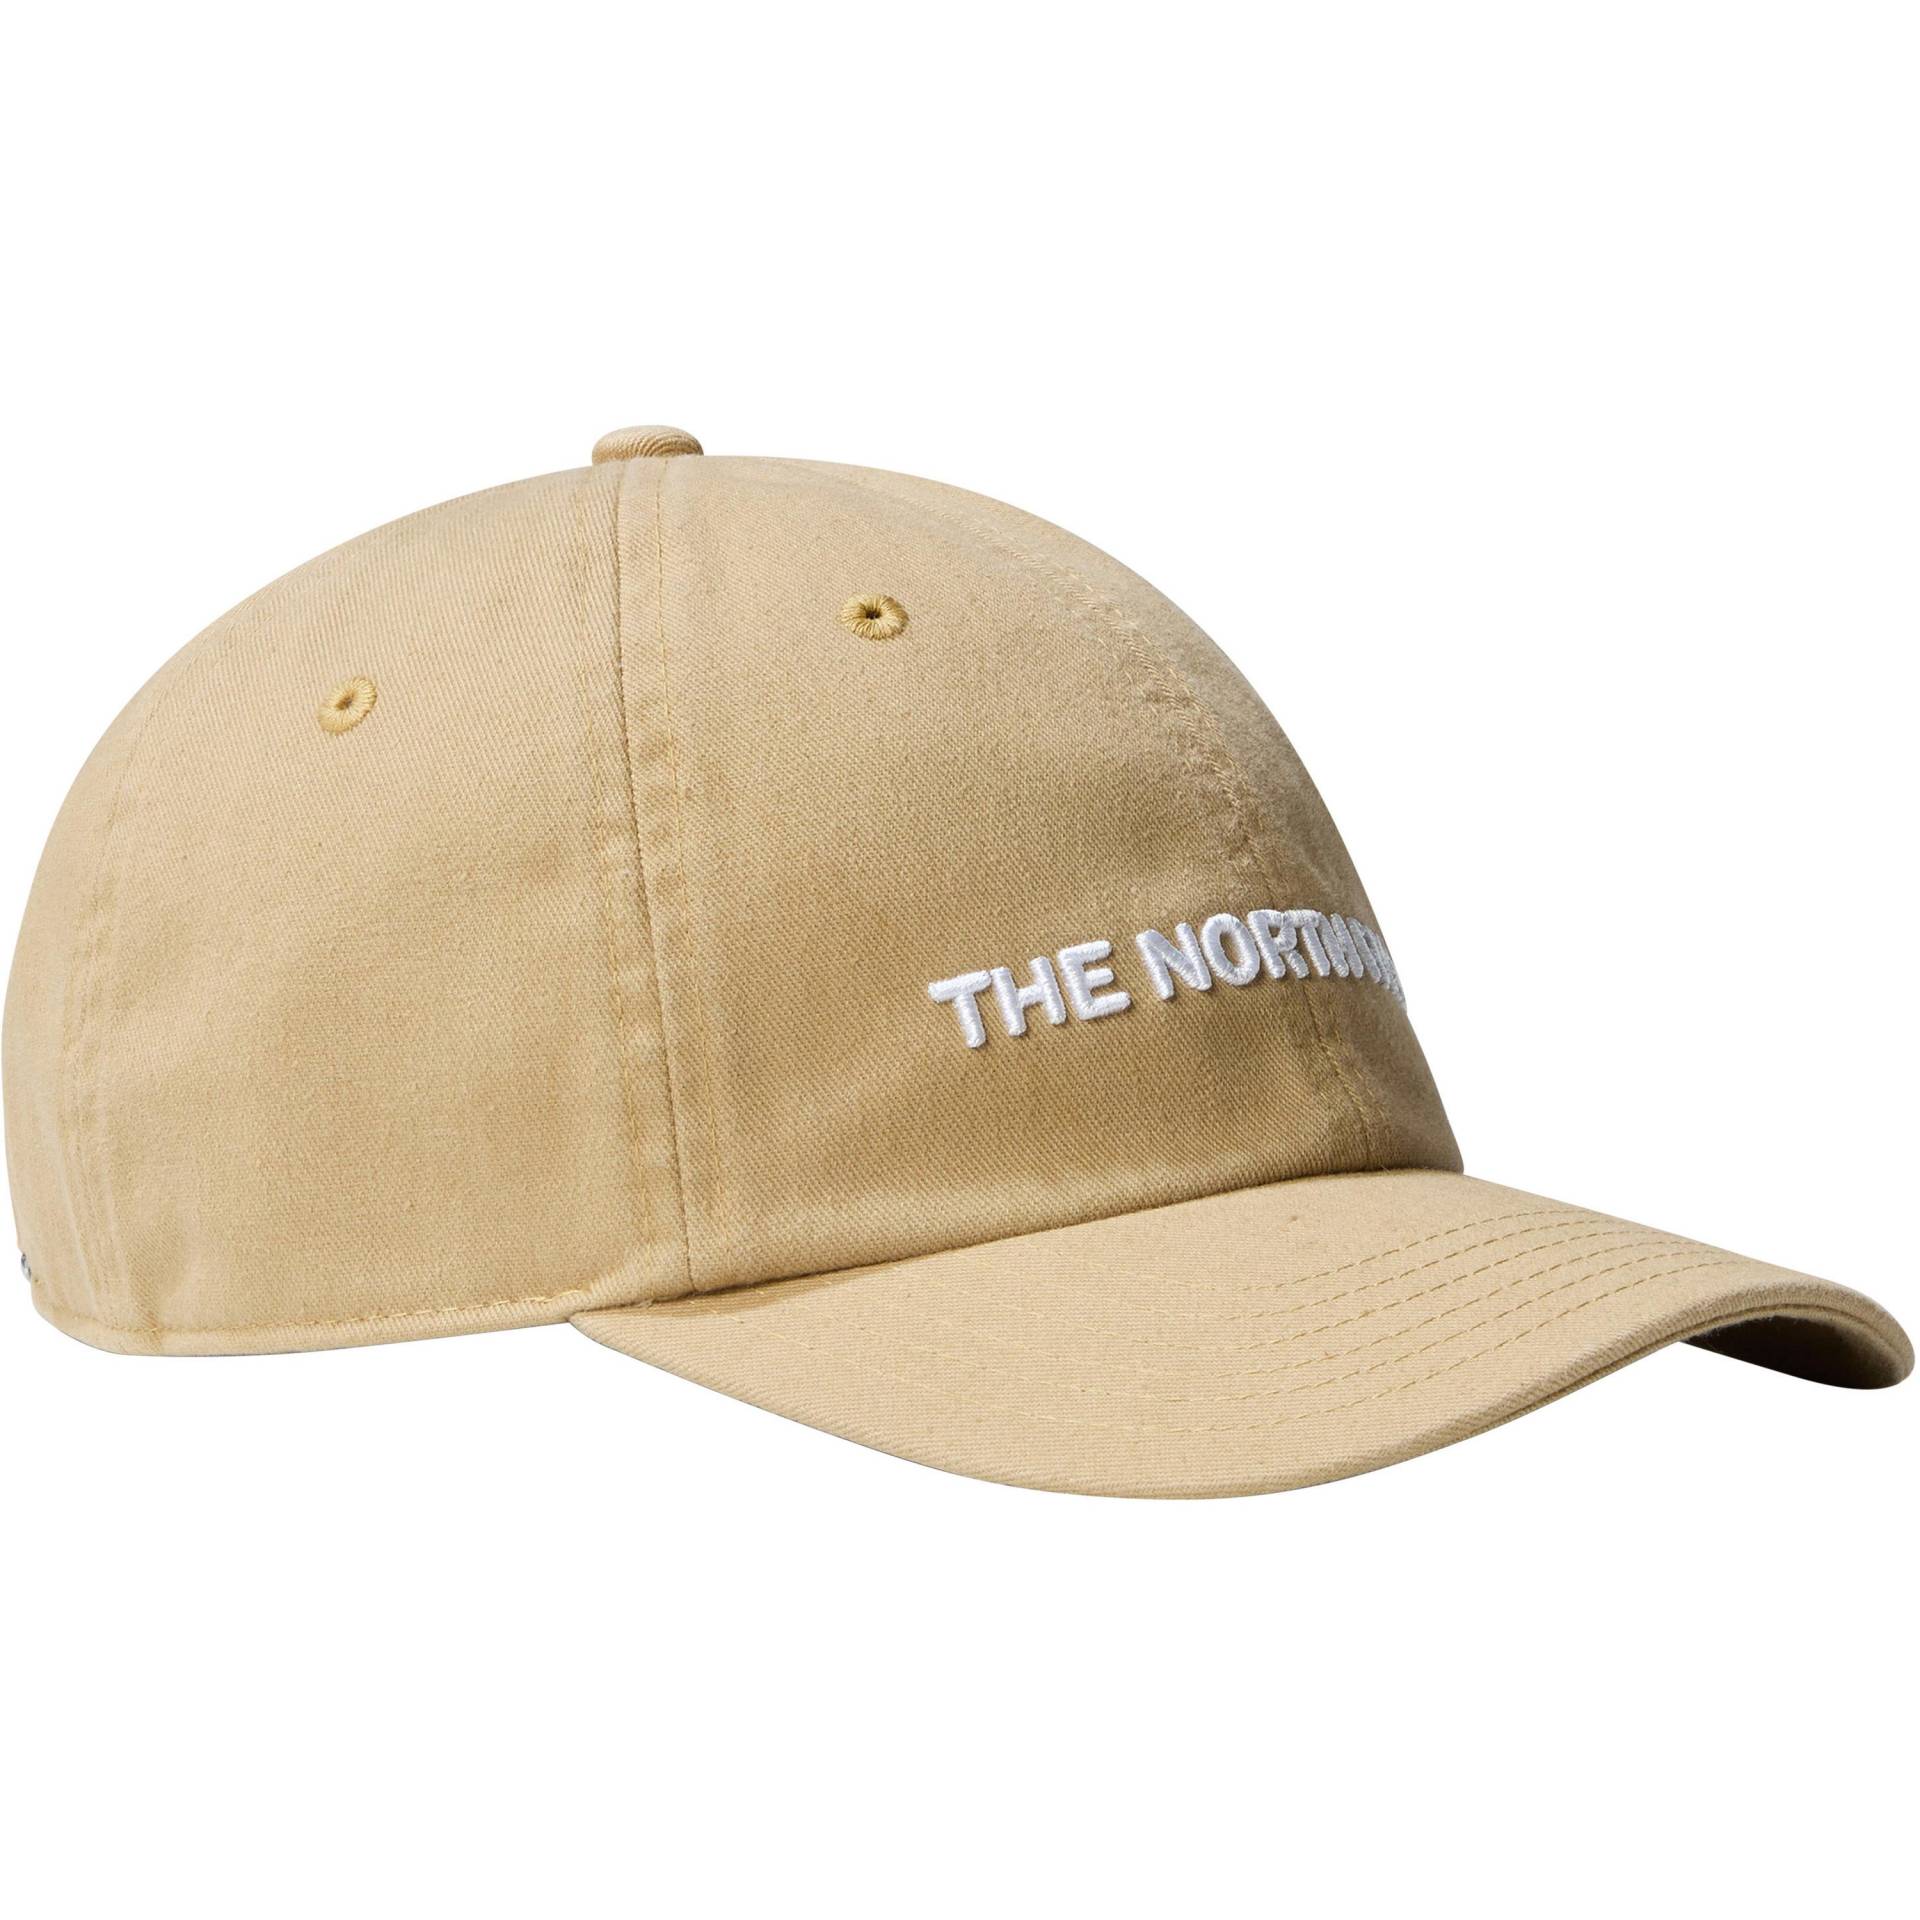 The North Face ROOMY NORM Cap Herren von The North Face